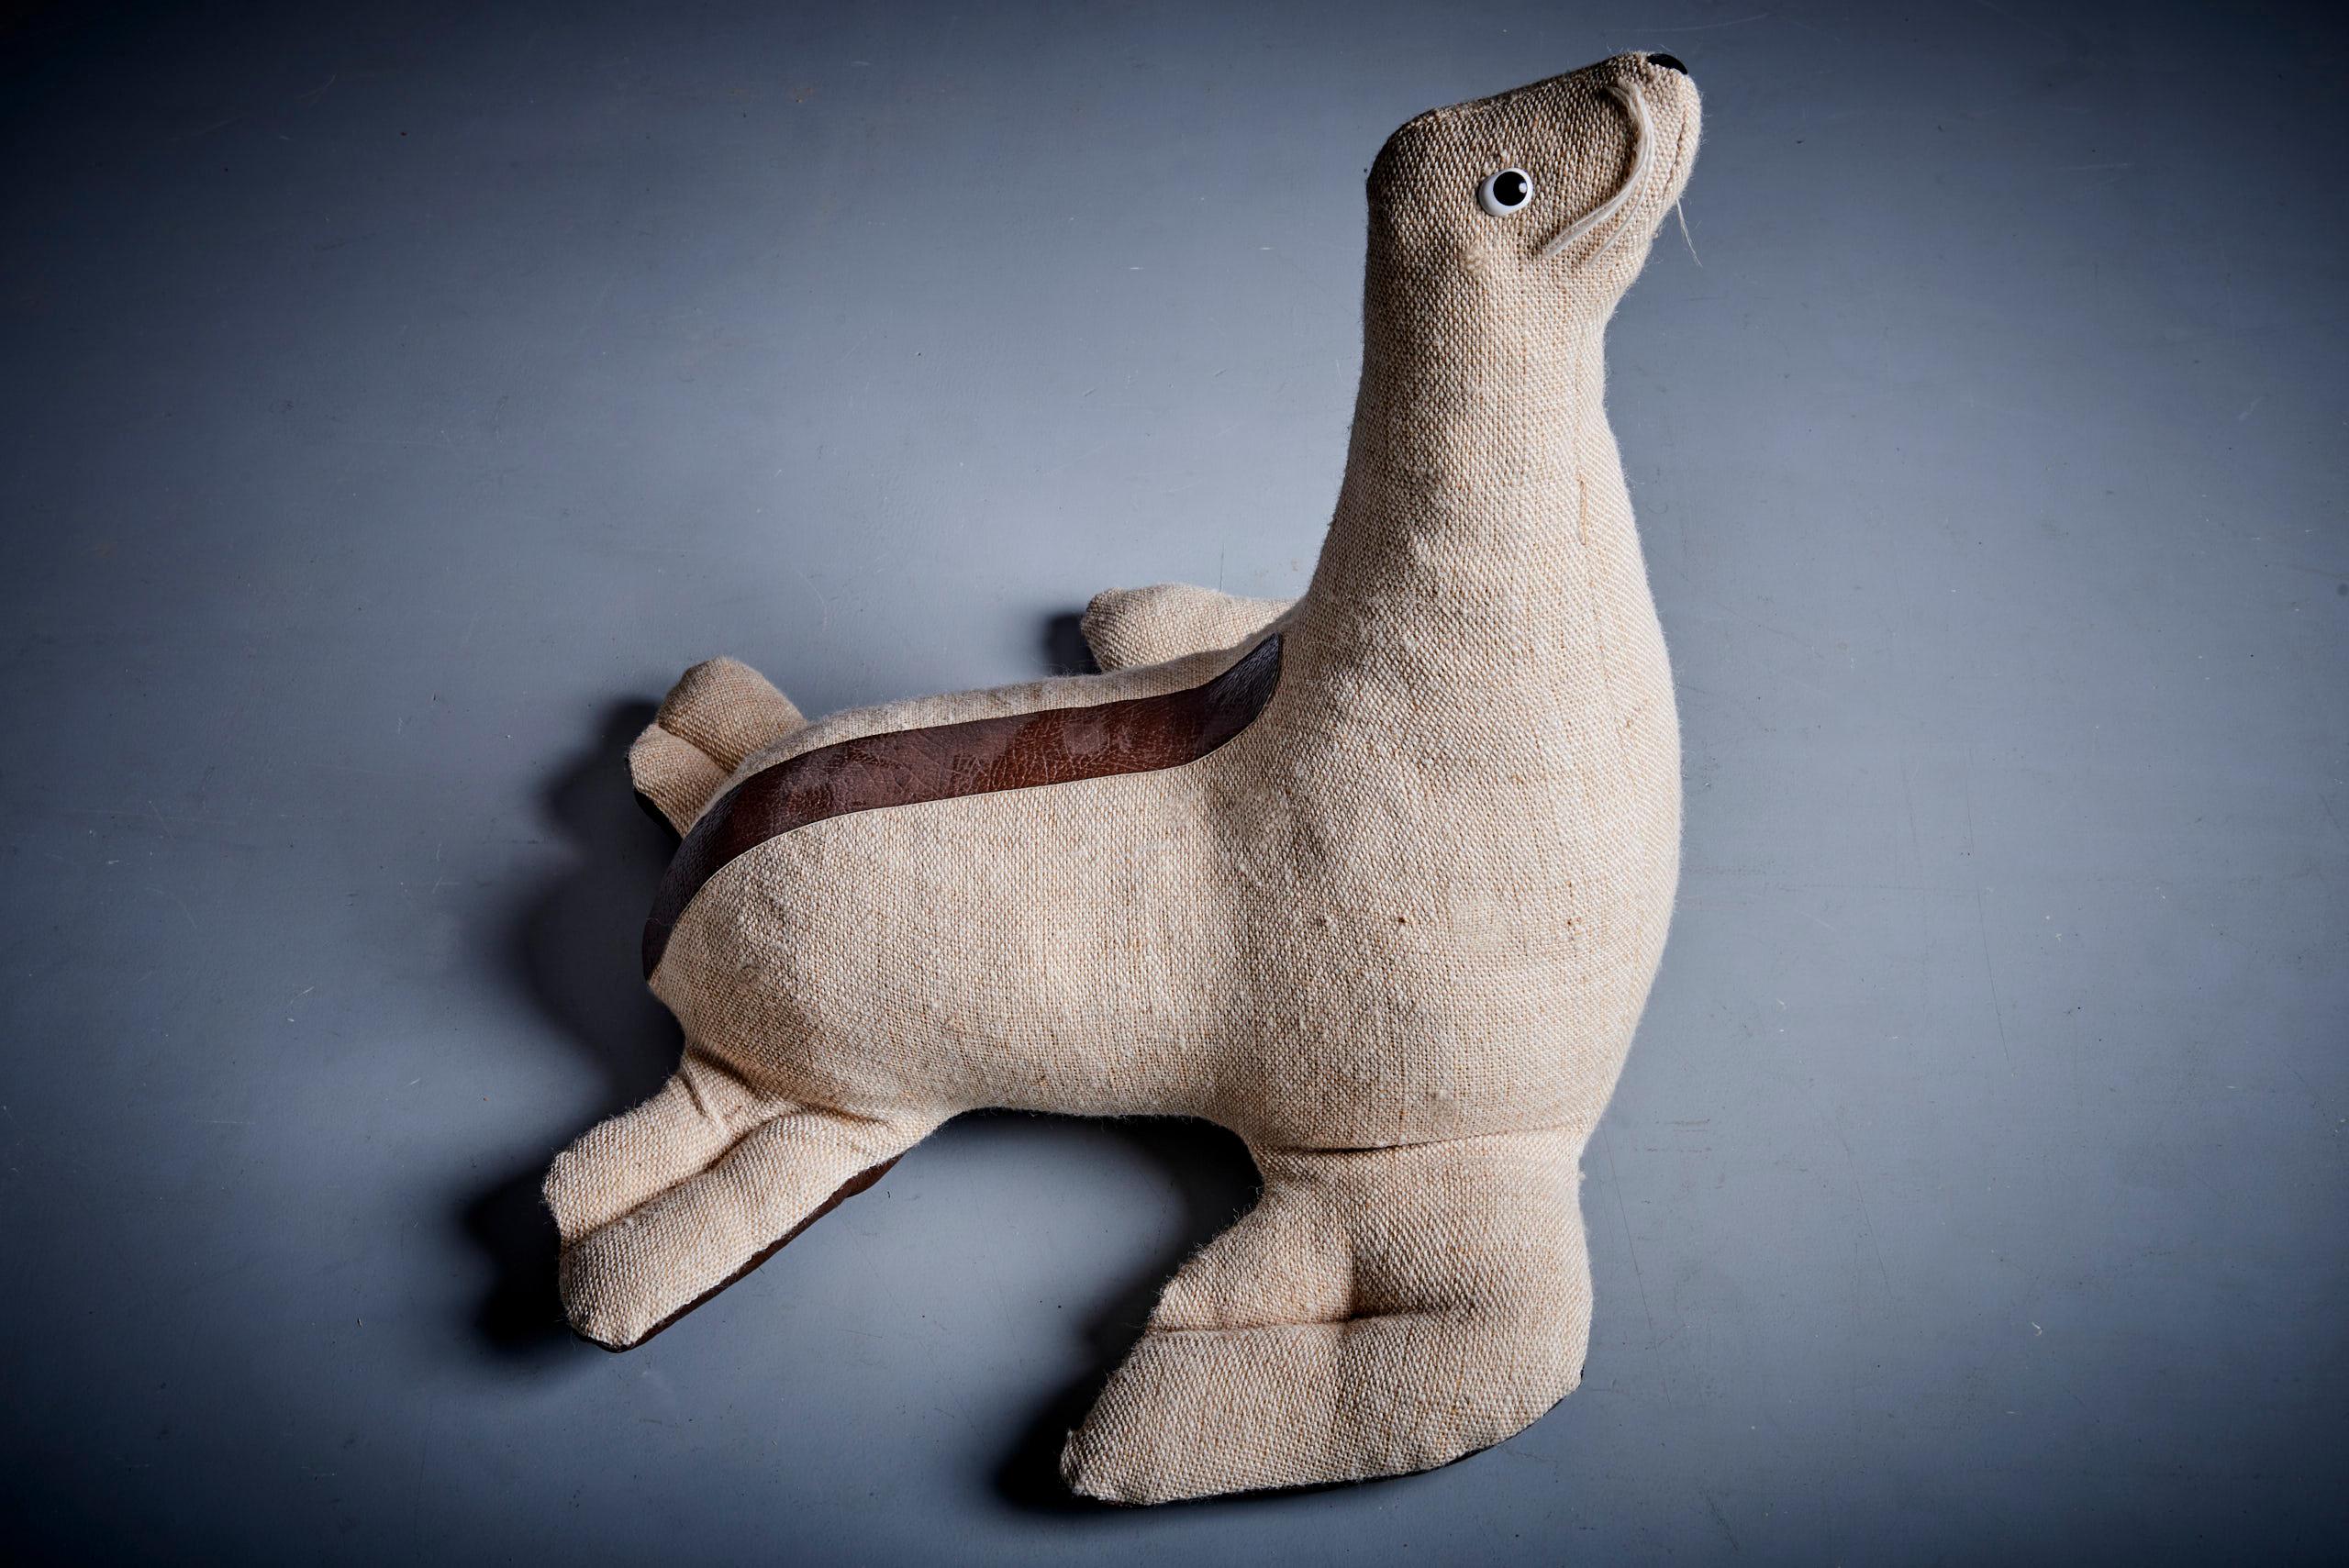 Very rare therapeutic toys Seal in natural jute with colored leather out of the 1970s in excellent collectors condition. The toy is designed by Renate Müller and handmade. The Renate Müller toys are exhibited in the MoMa, New York.

